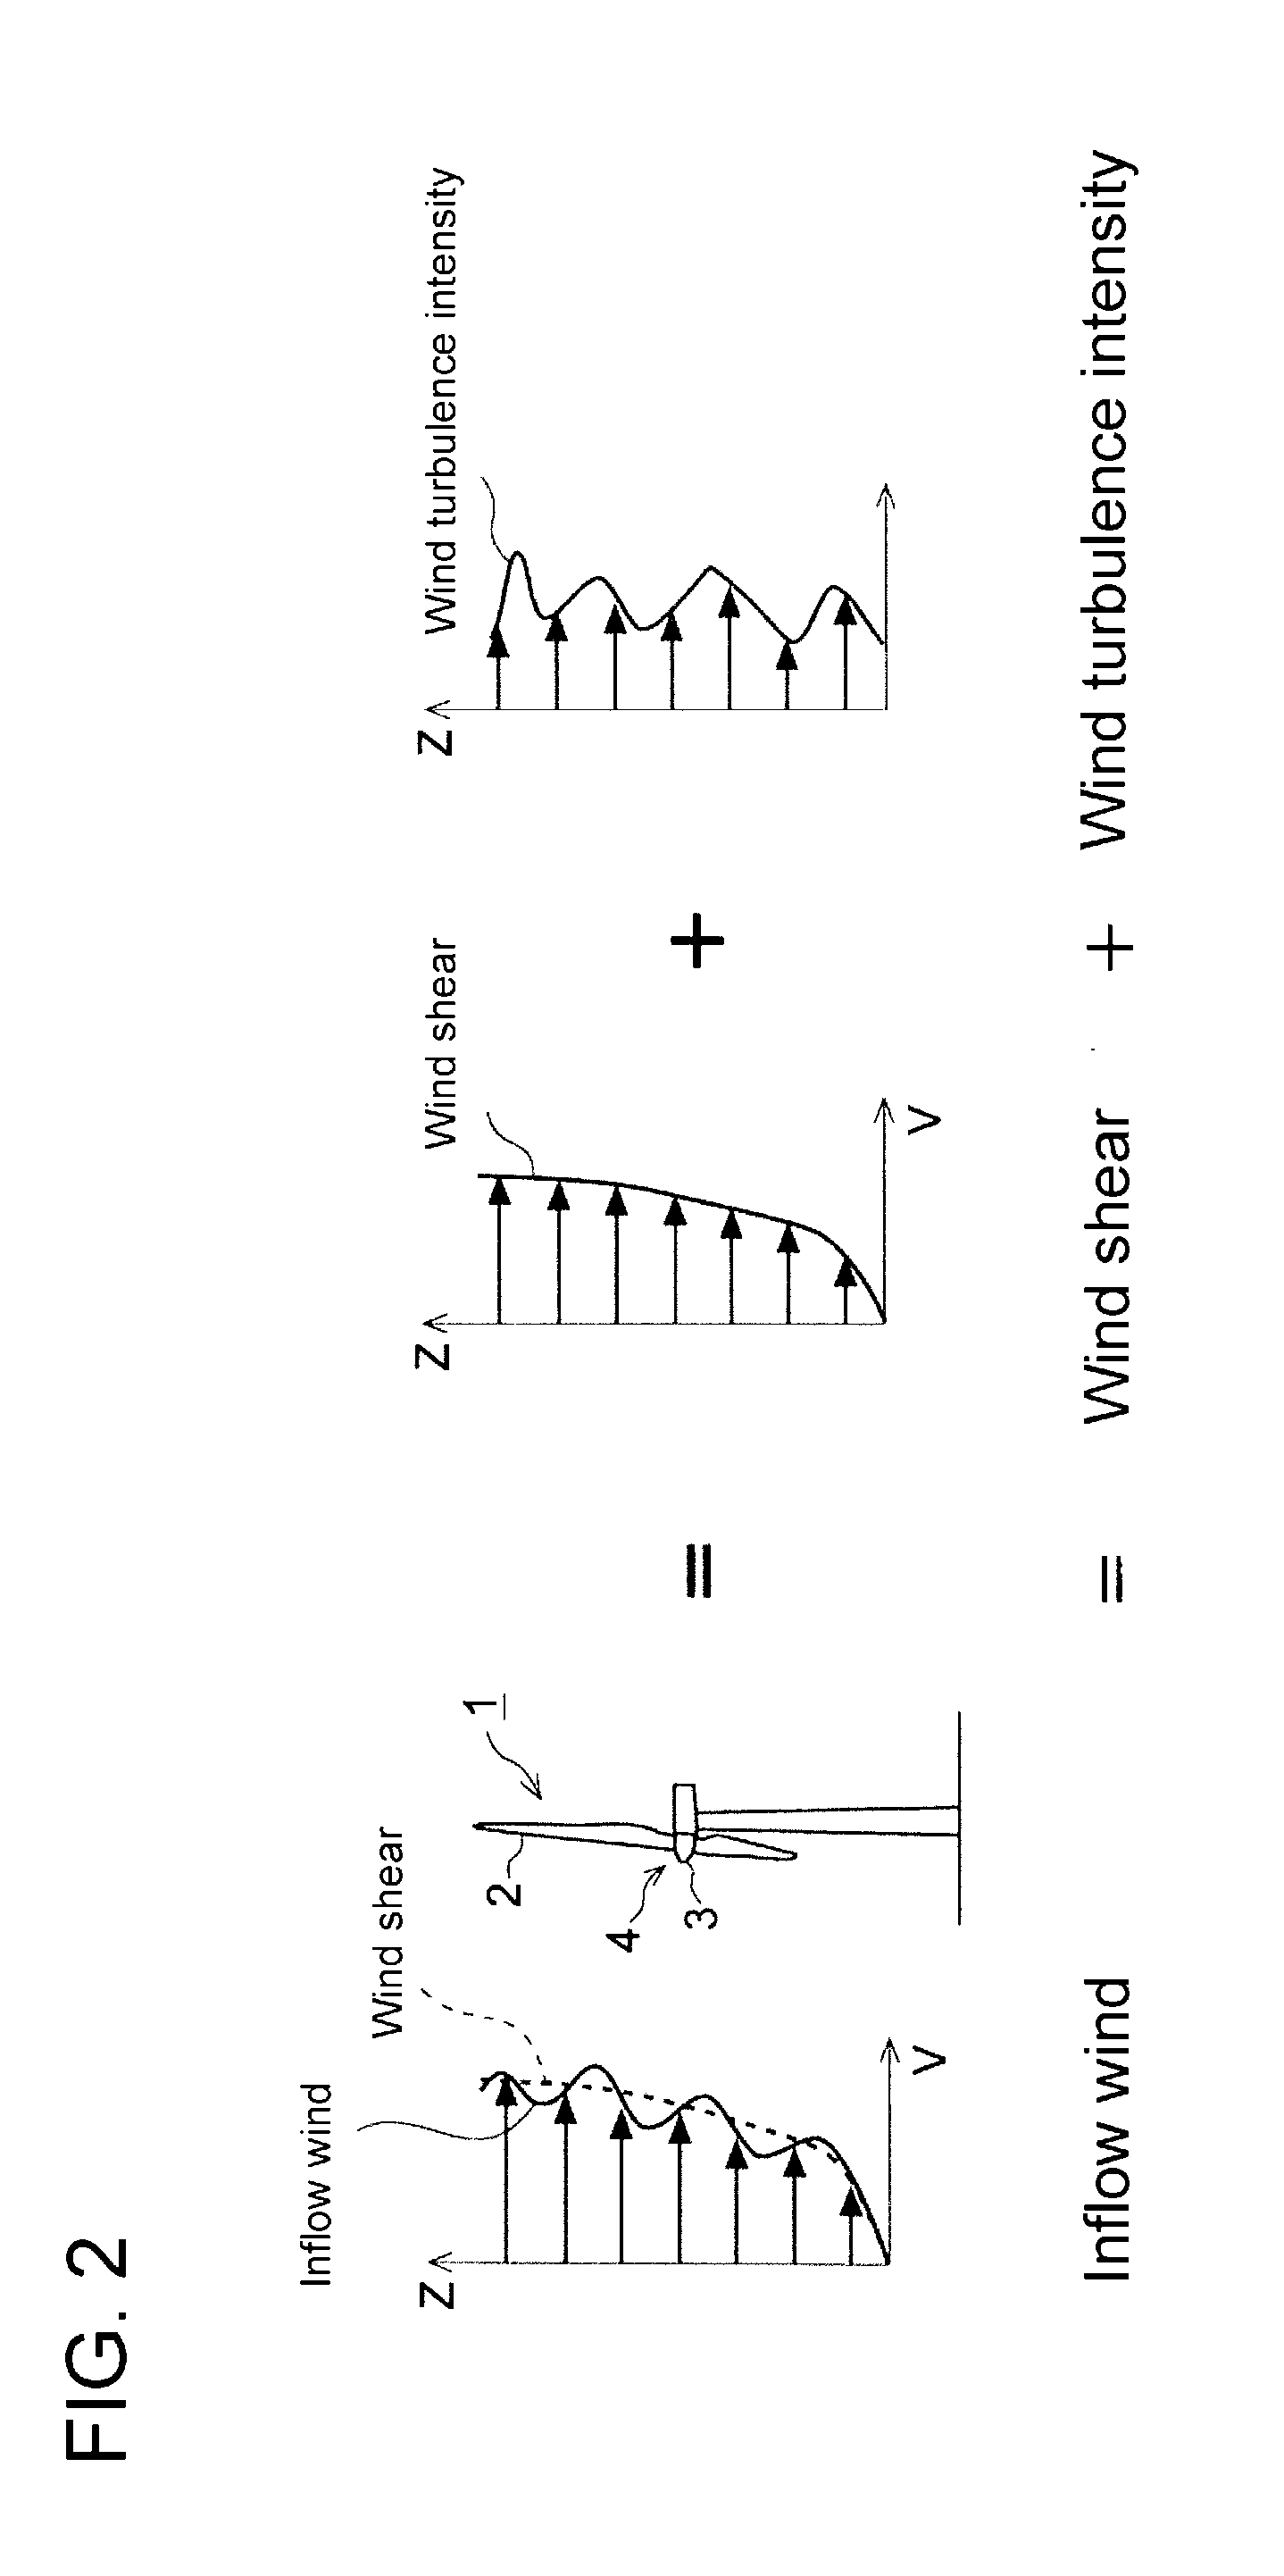 Monitoring system and a monitoring method for a wind turbine generator